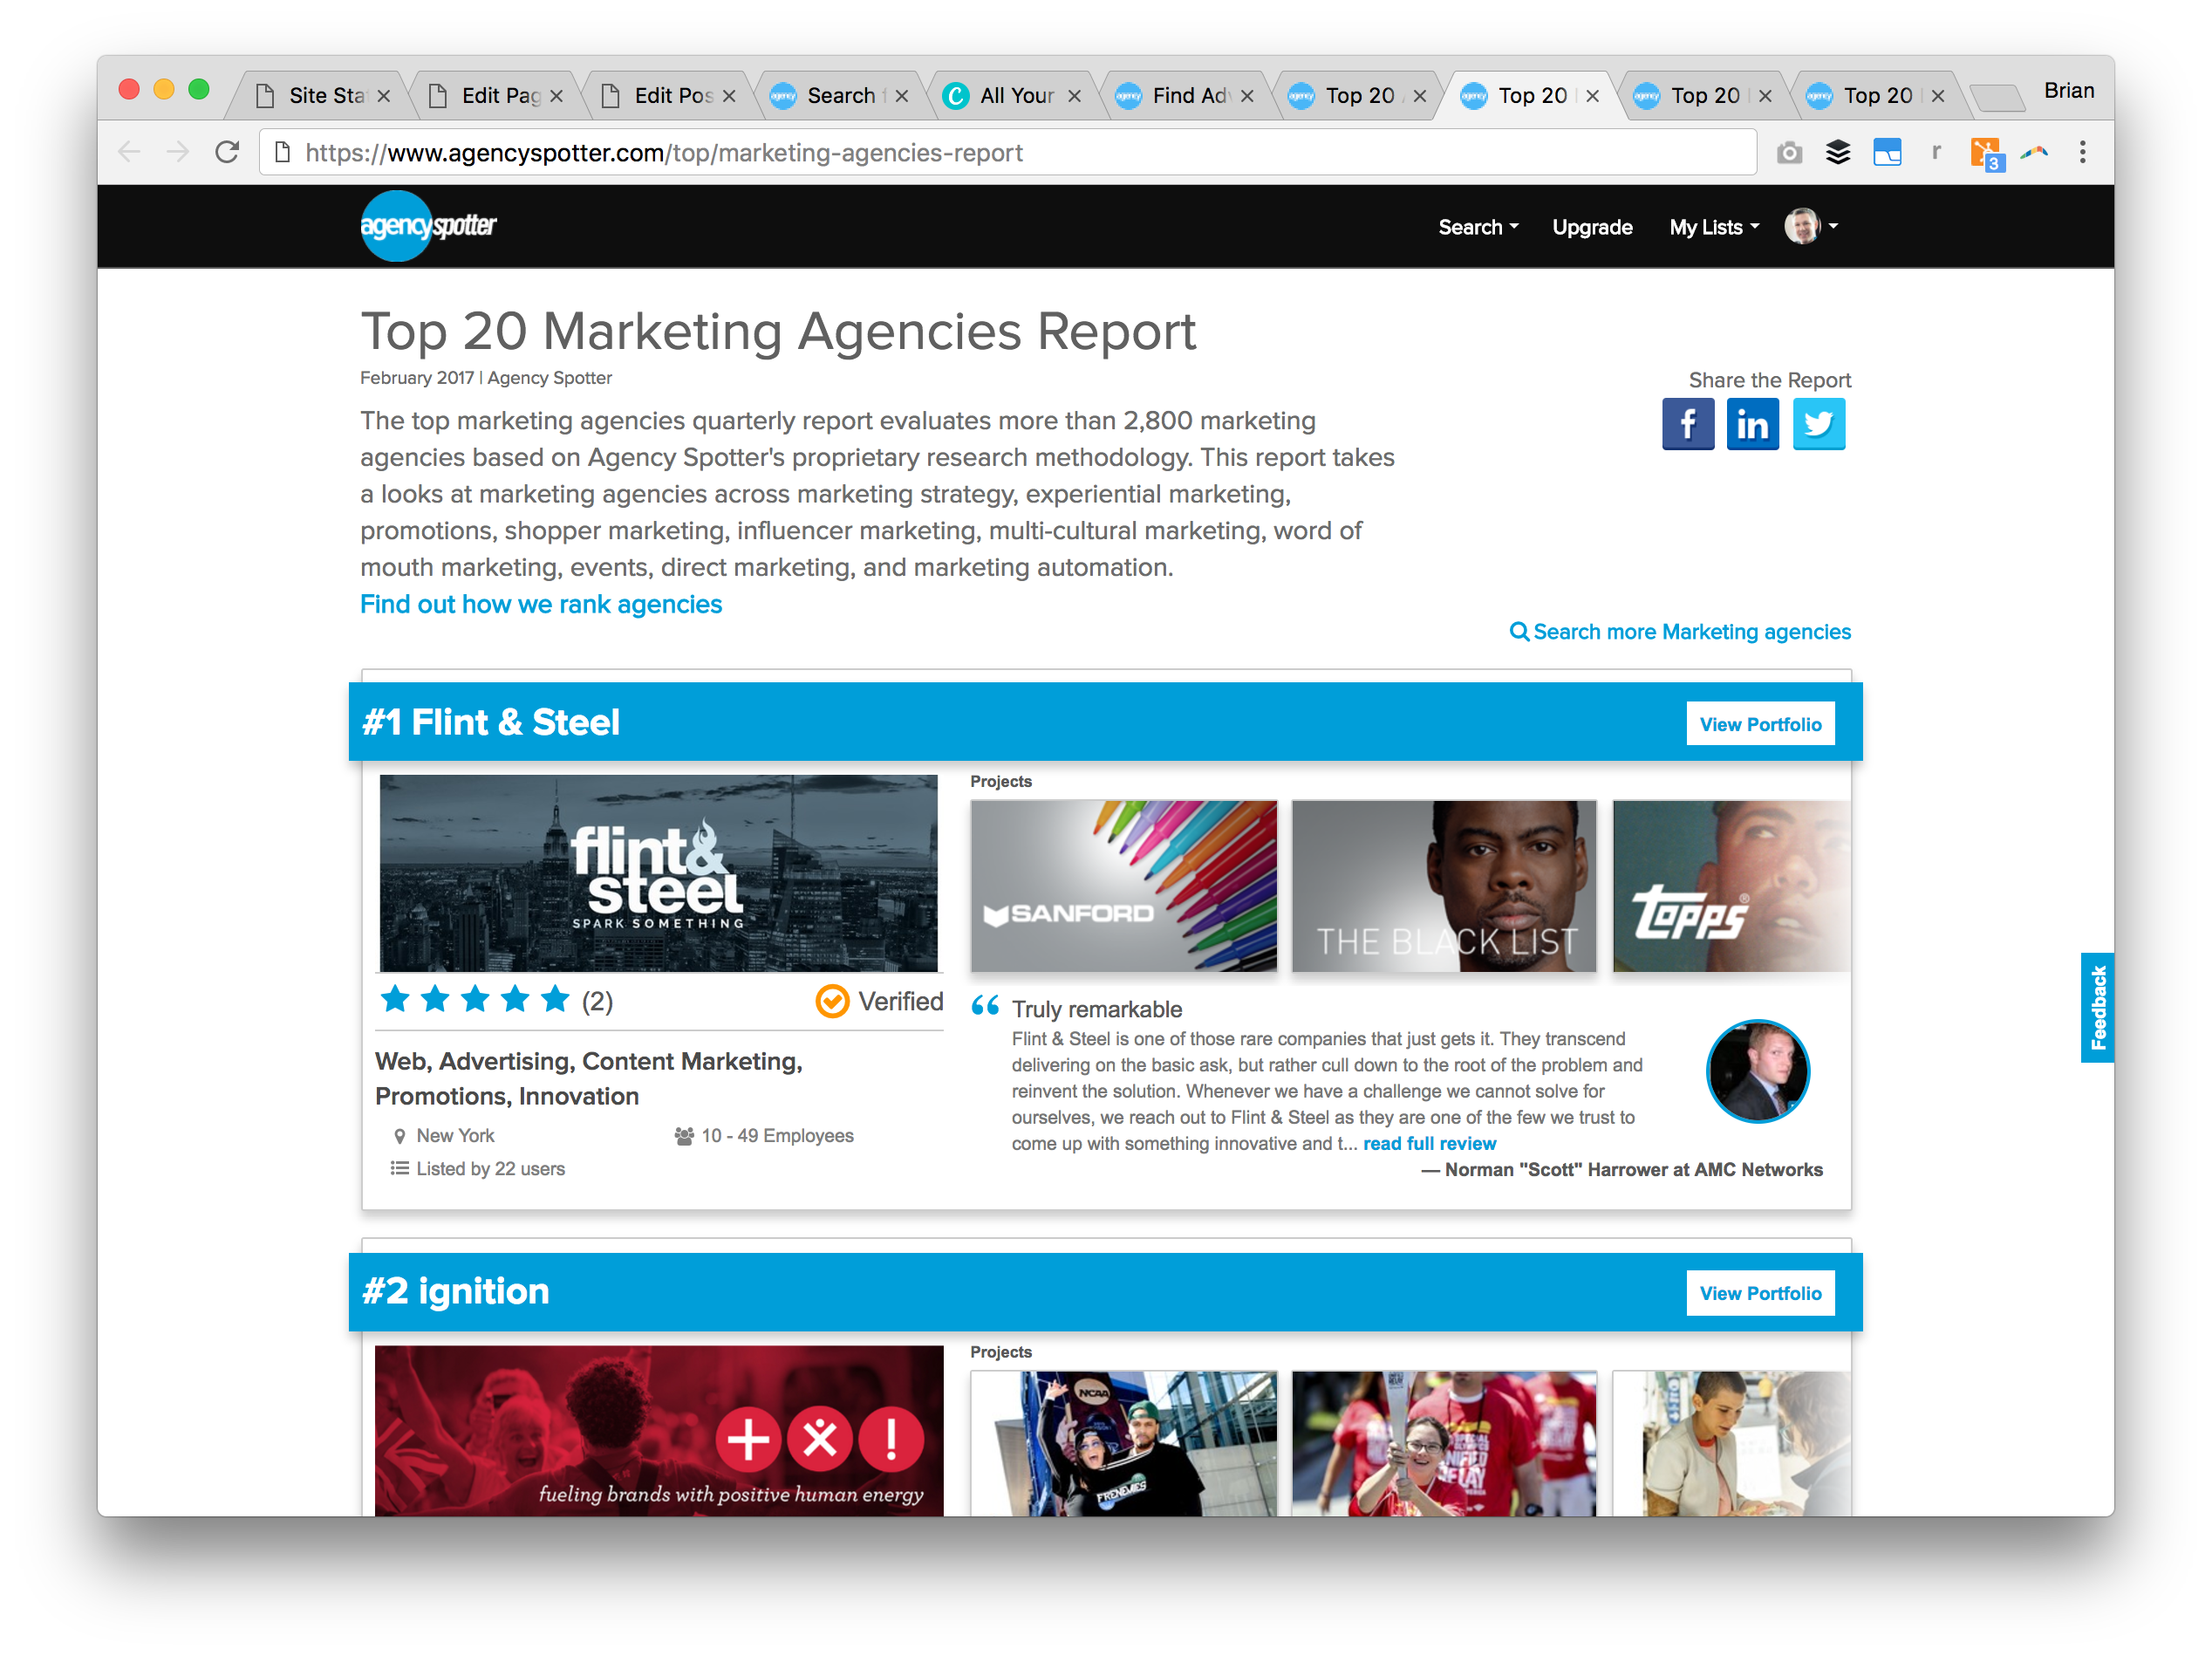 Preview: Top Marketing Agencies Report February 2017 on Agency Spotter